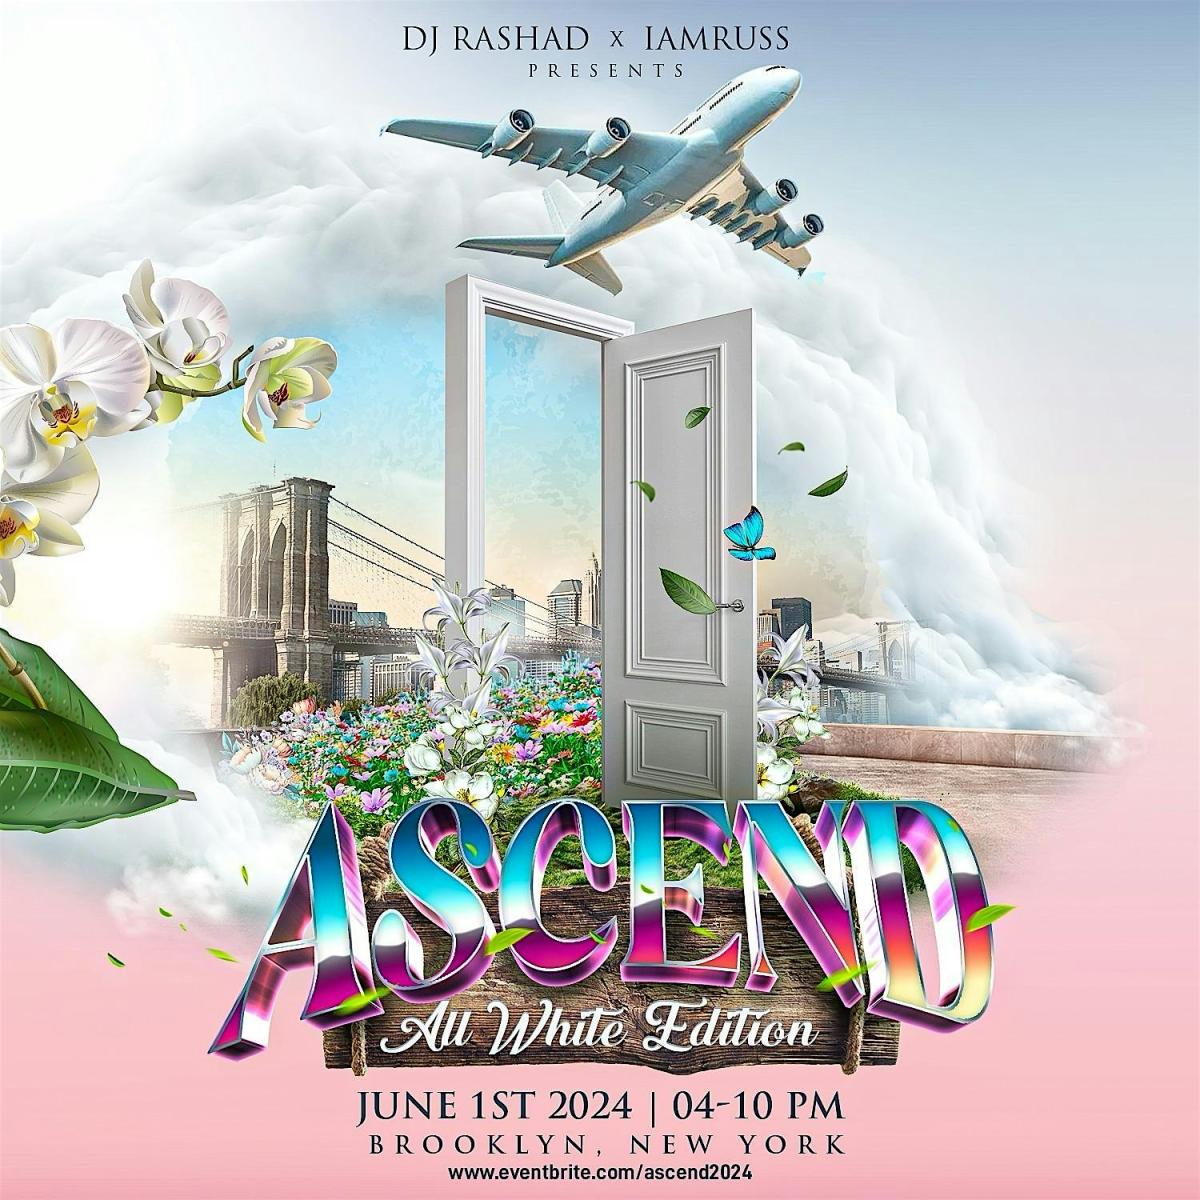 Ascend flyer or graphic.